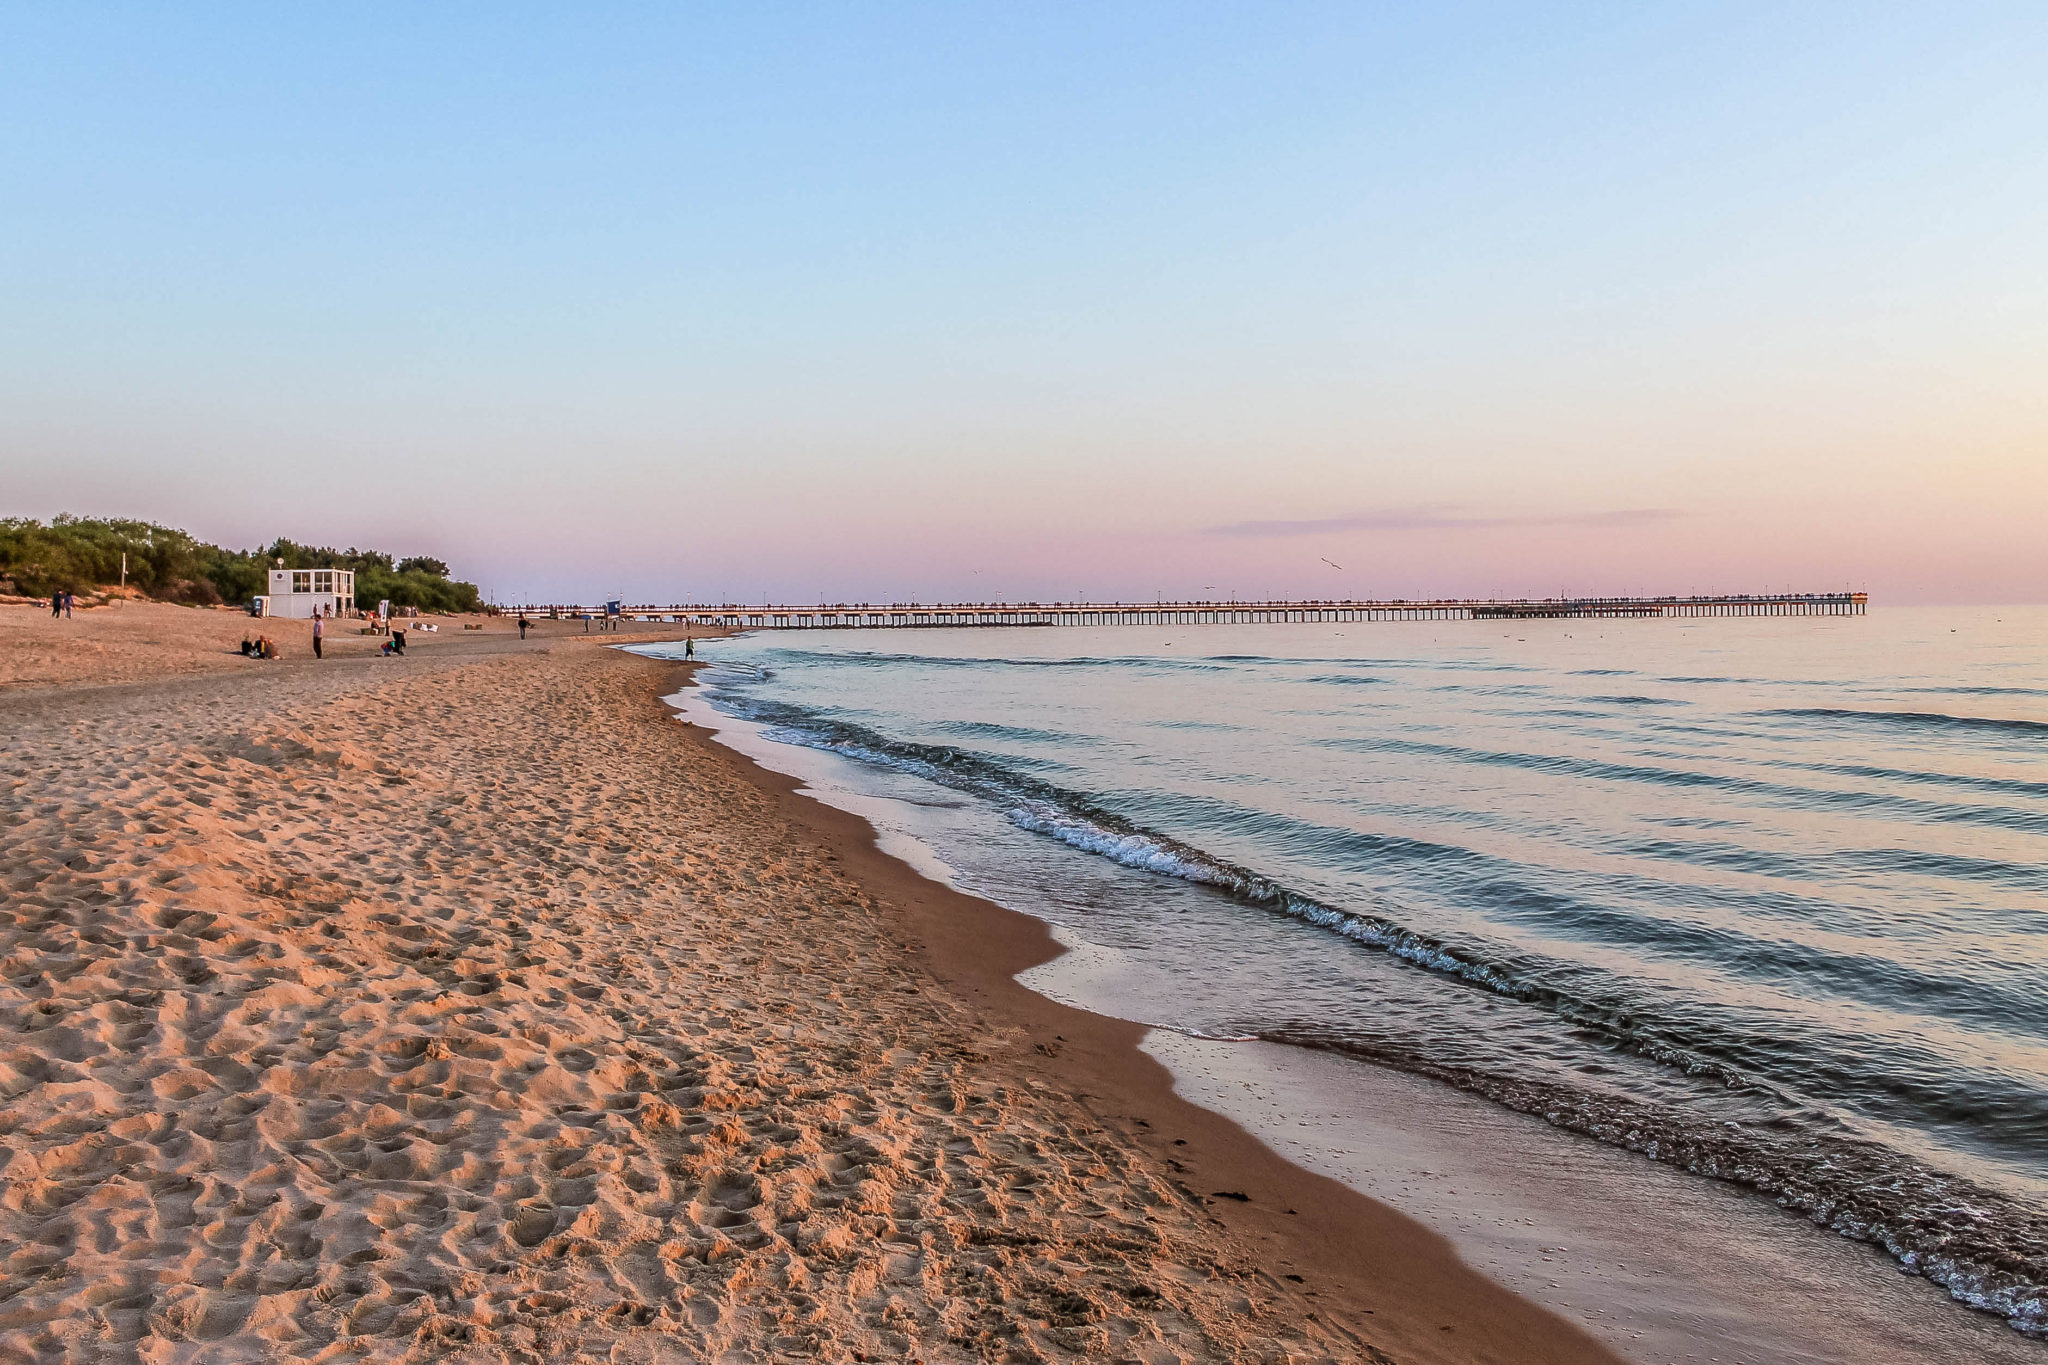 The soft white sand of Palanga beach at sunset on the Baltic Sea